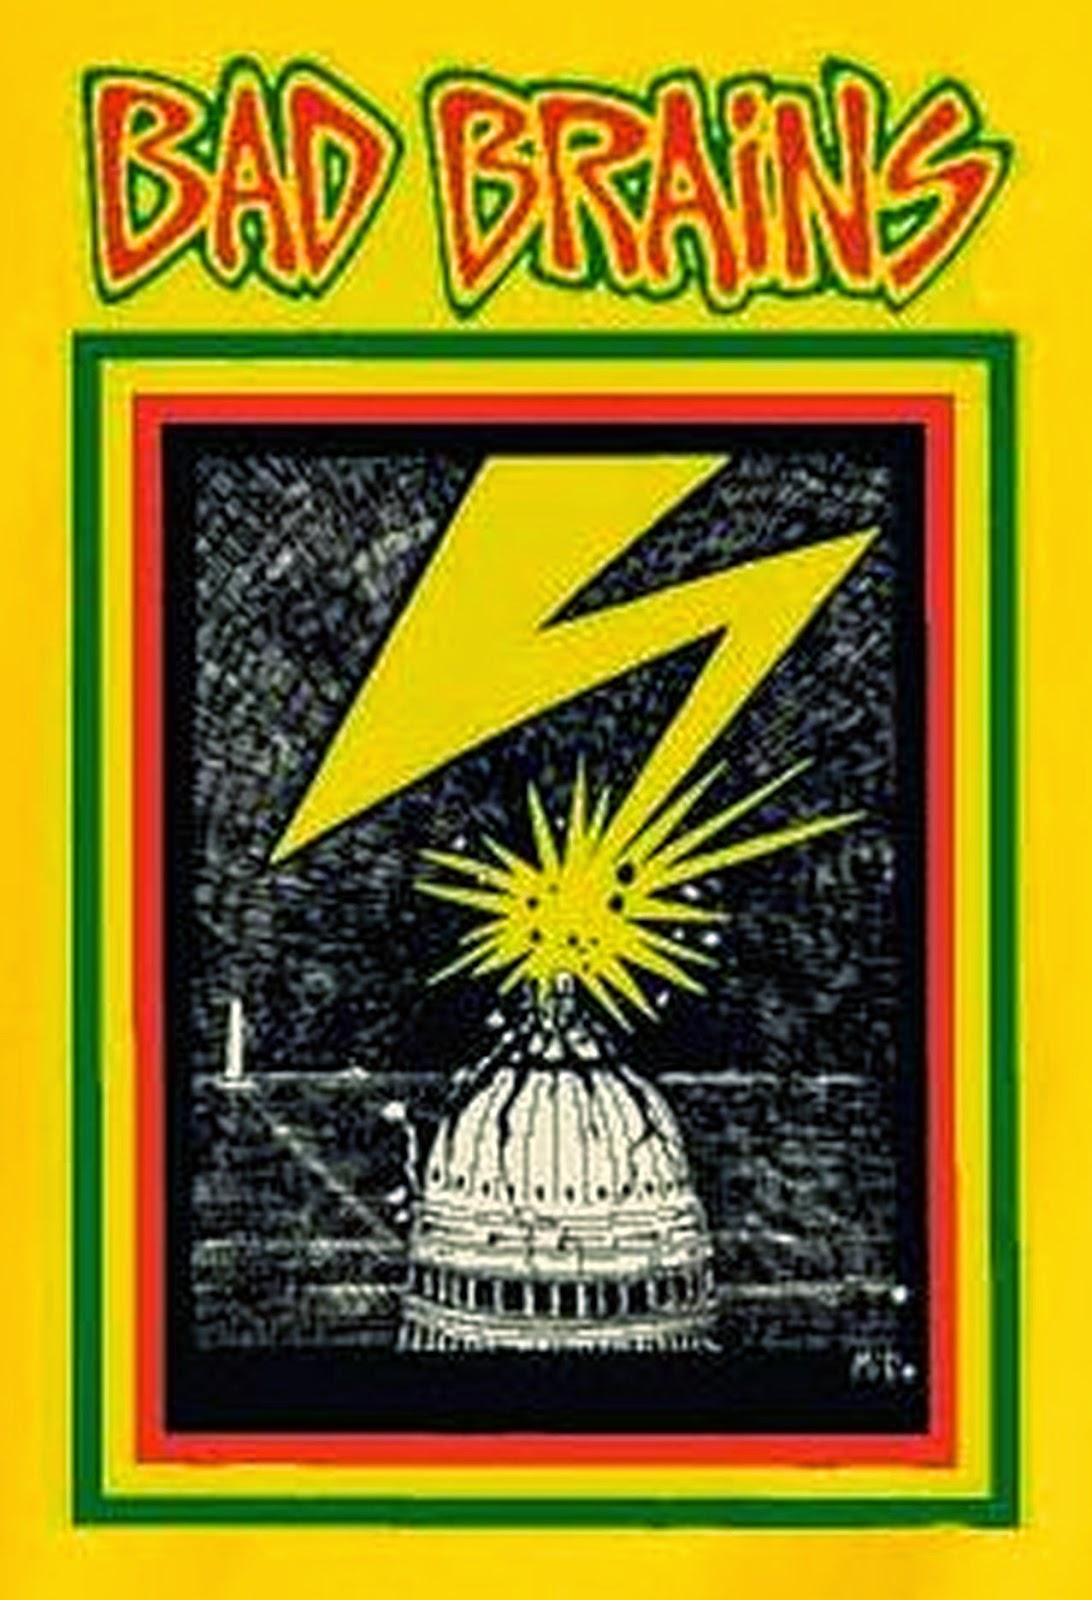 Under The Surface...: BAD BRAINS